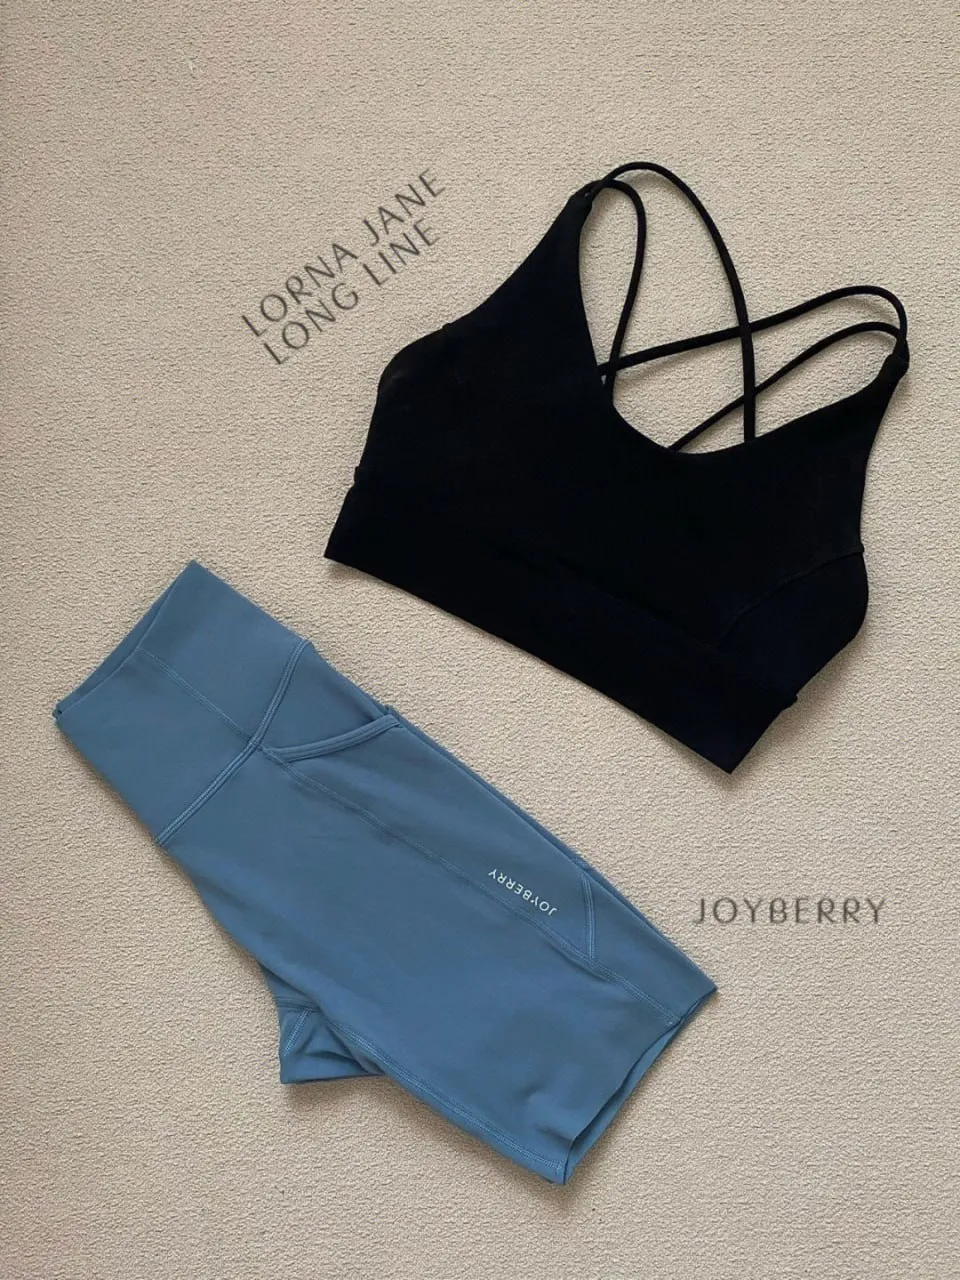 Lululemon and Lorna Jane have transformed the popular activewear